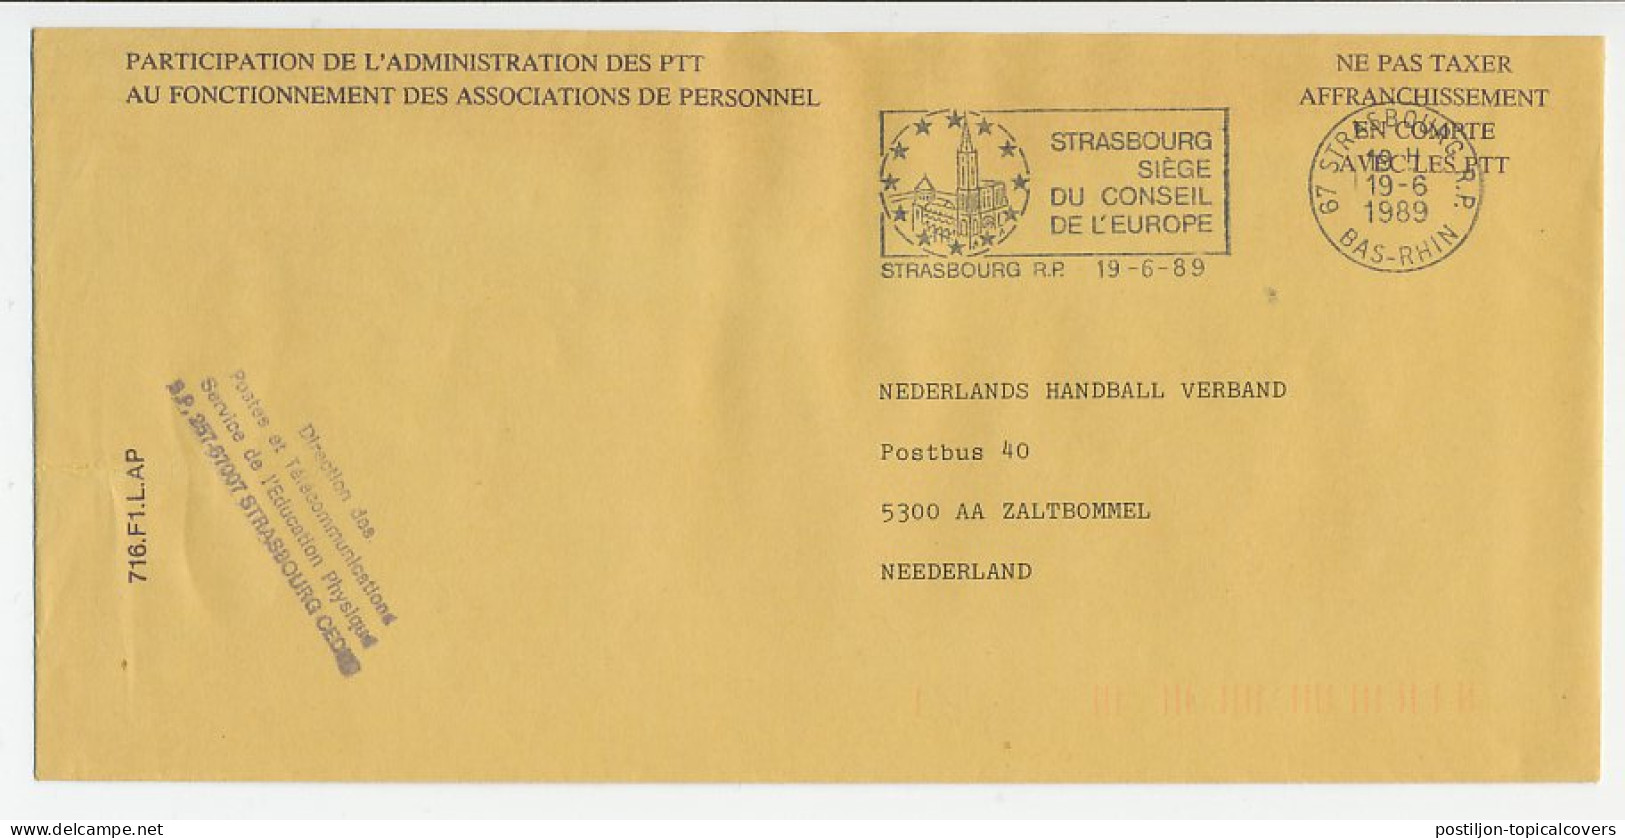 Service Cover / Postmark France 1989 Strasbourg Seat Of The Council Of Europe - EU-Organe